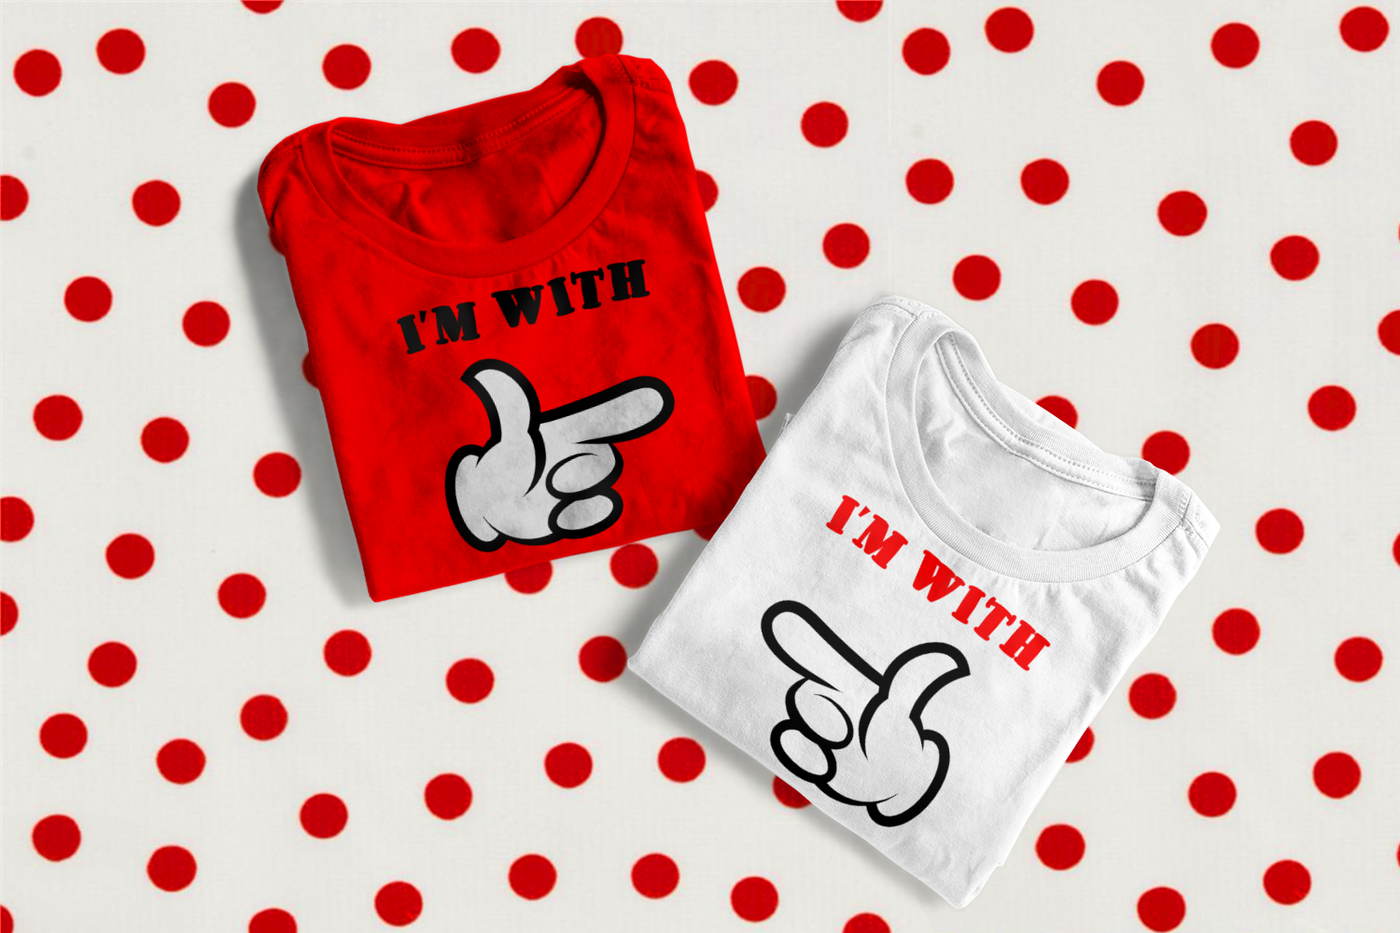 Design duo with pointing cartoon gloves that say "I'm with"